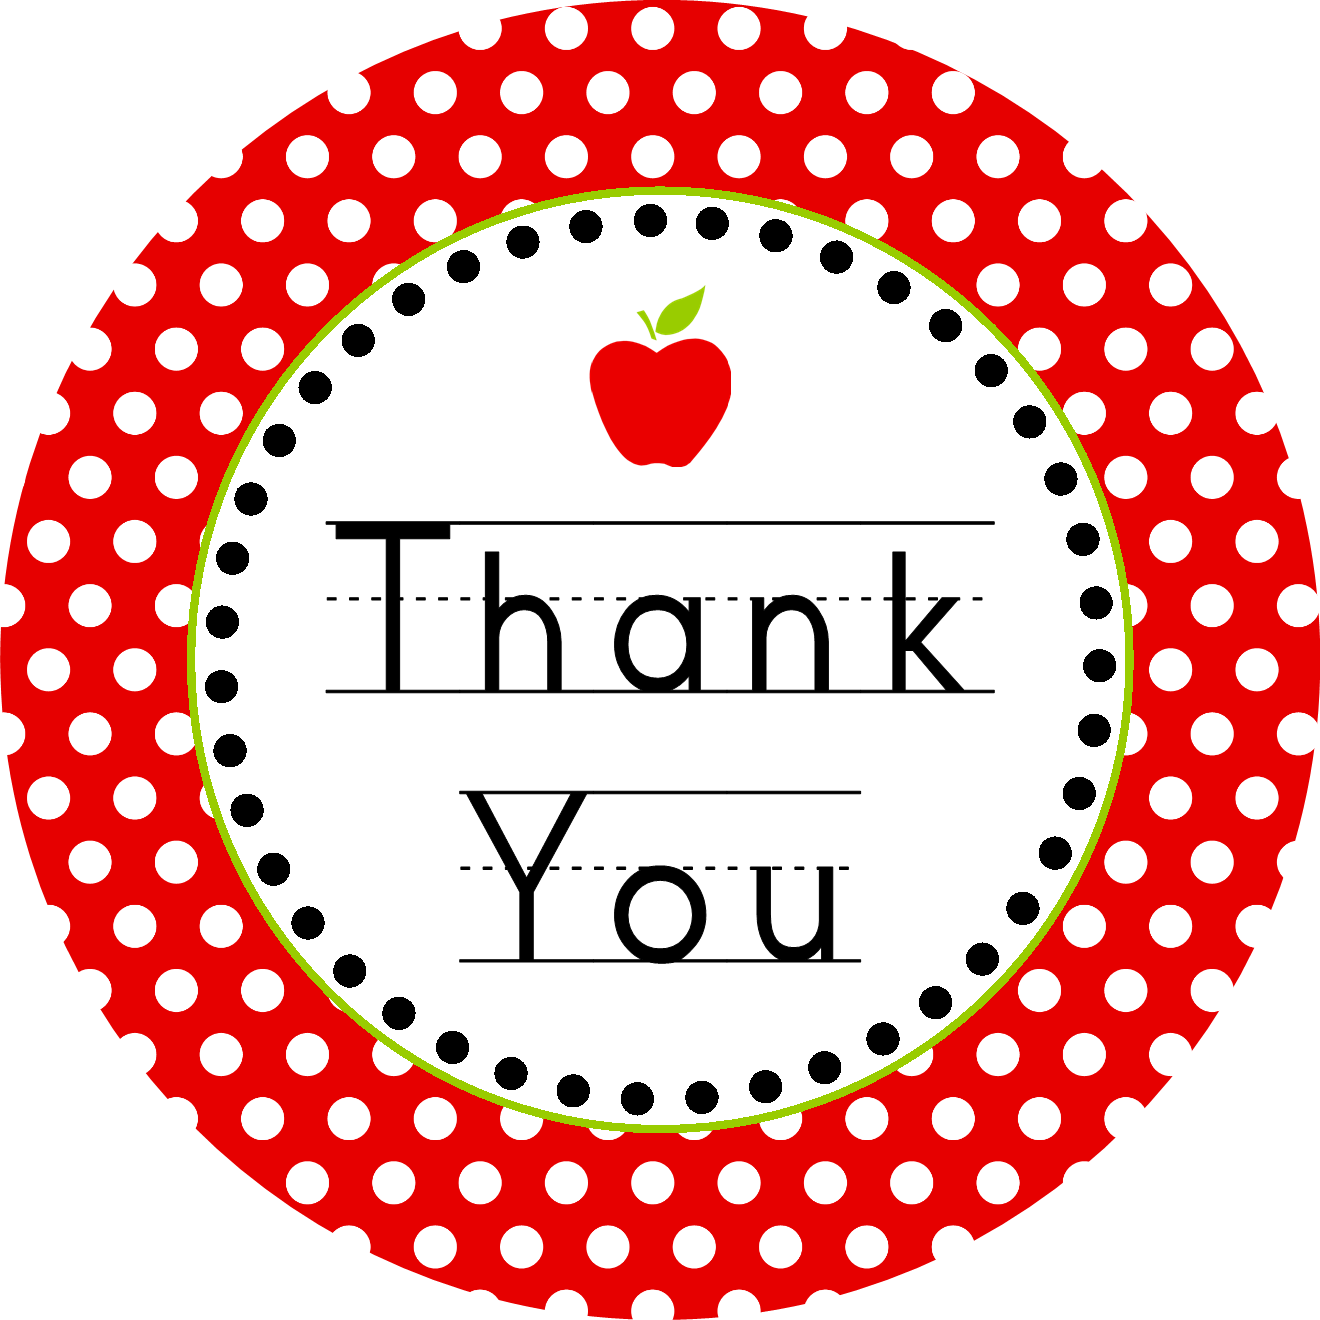 free clipart images thank you - photo #29